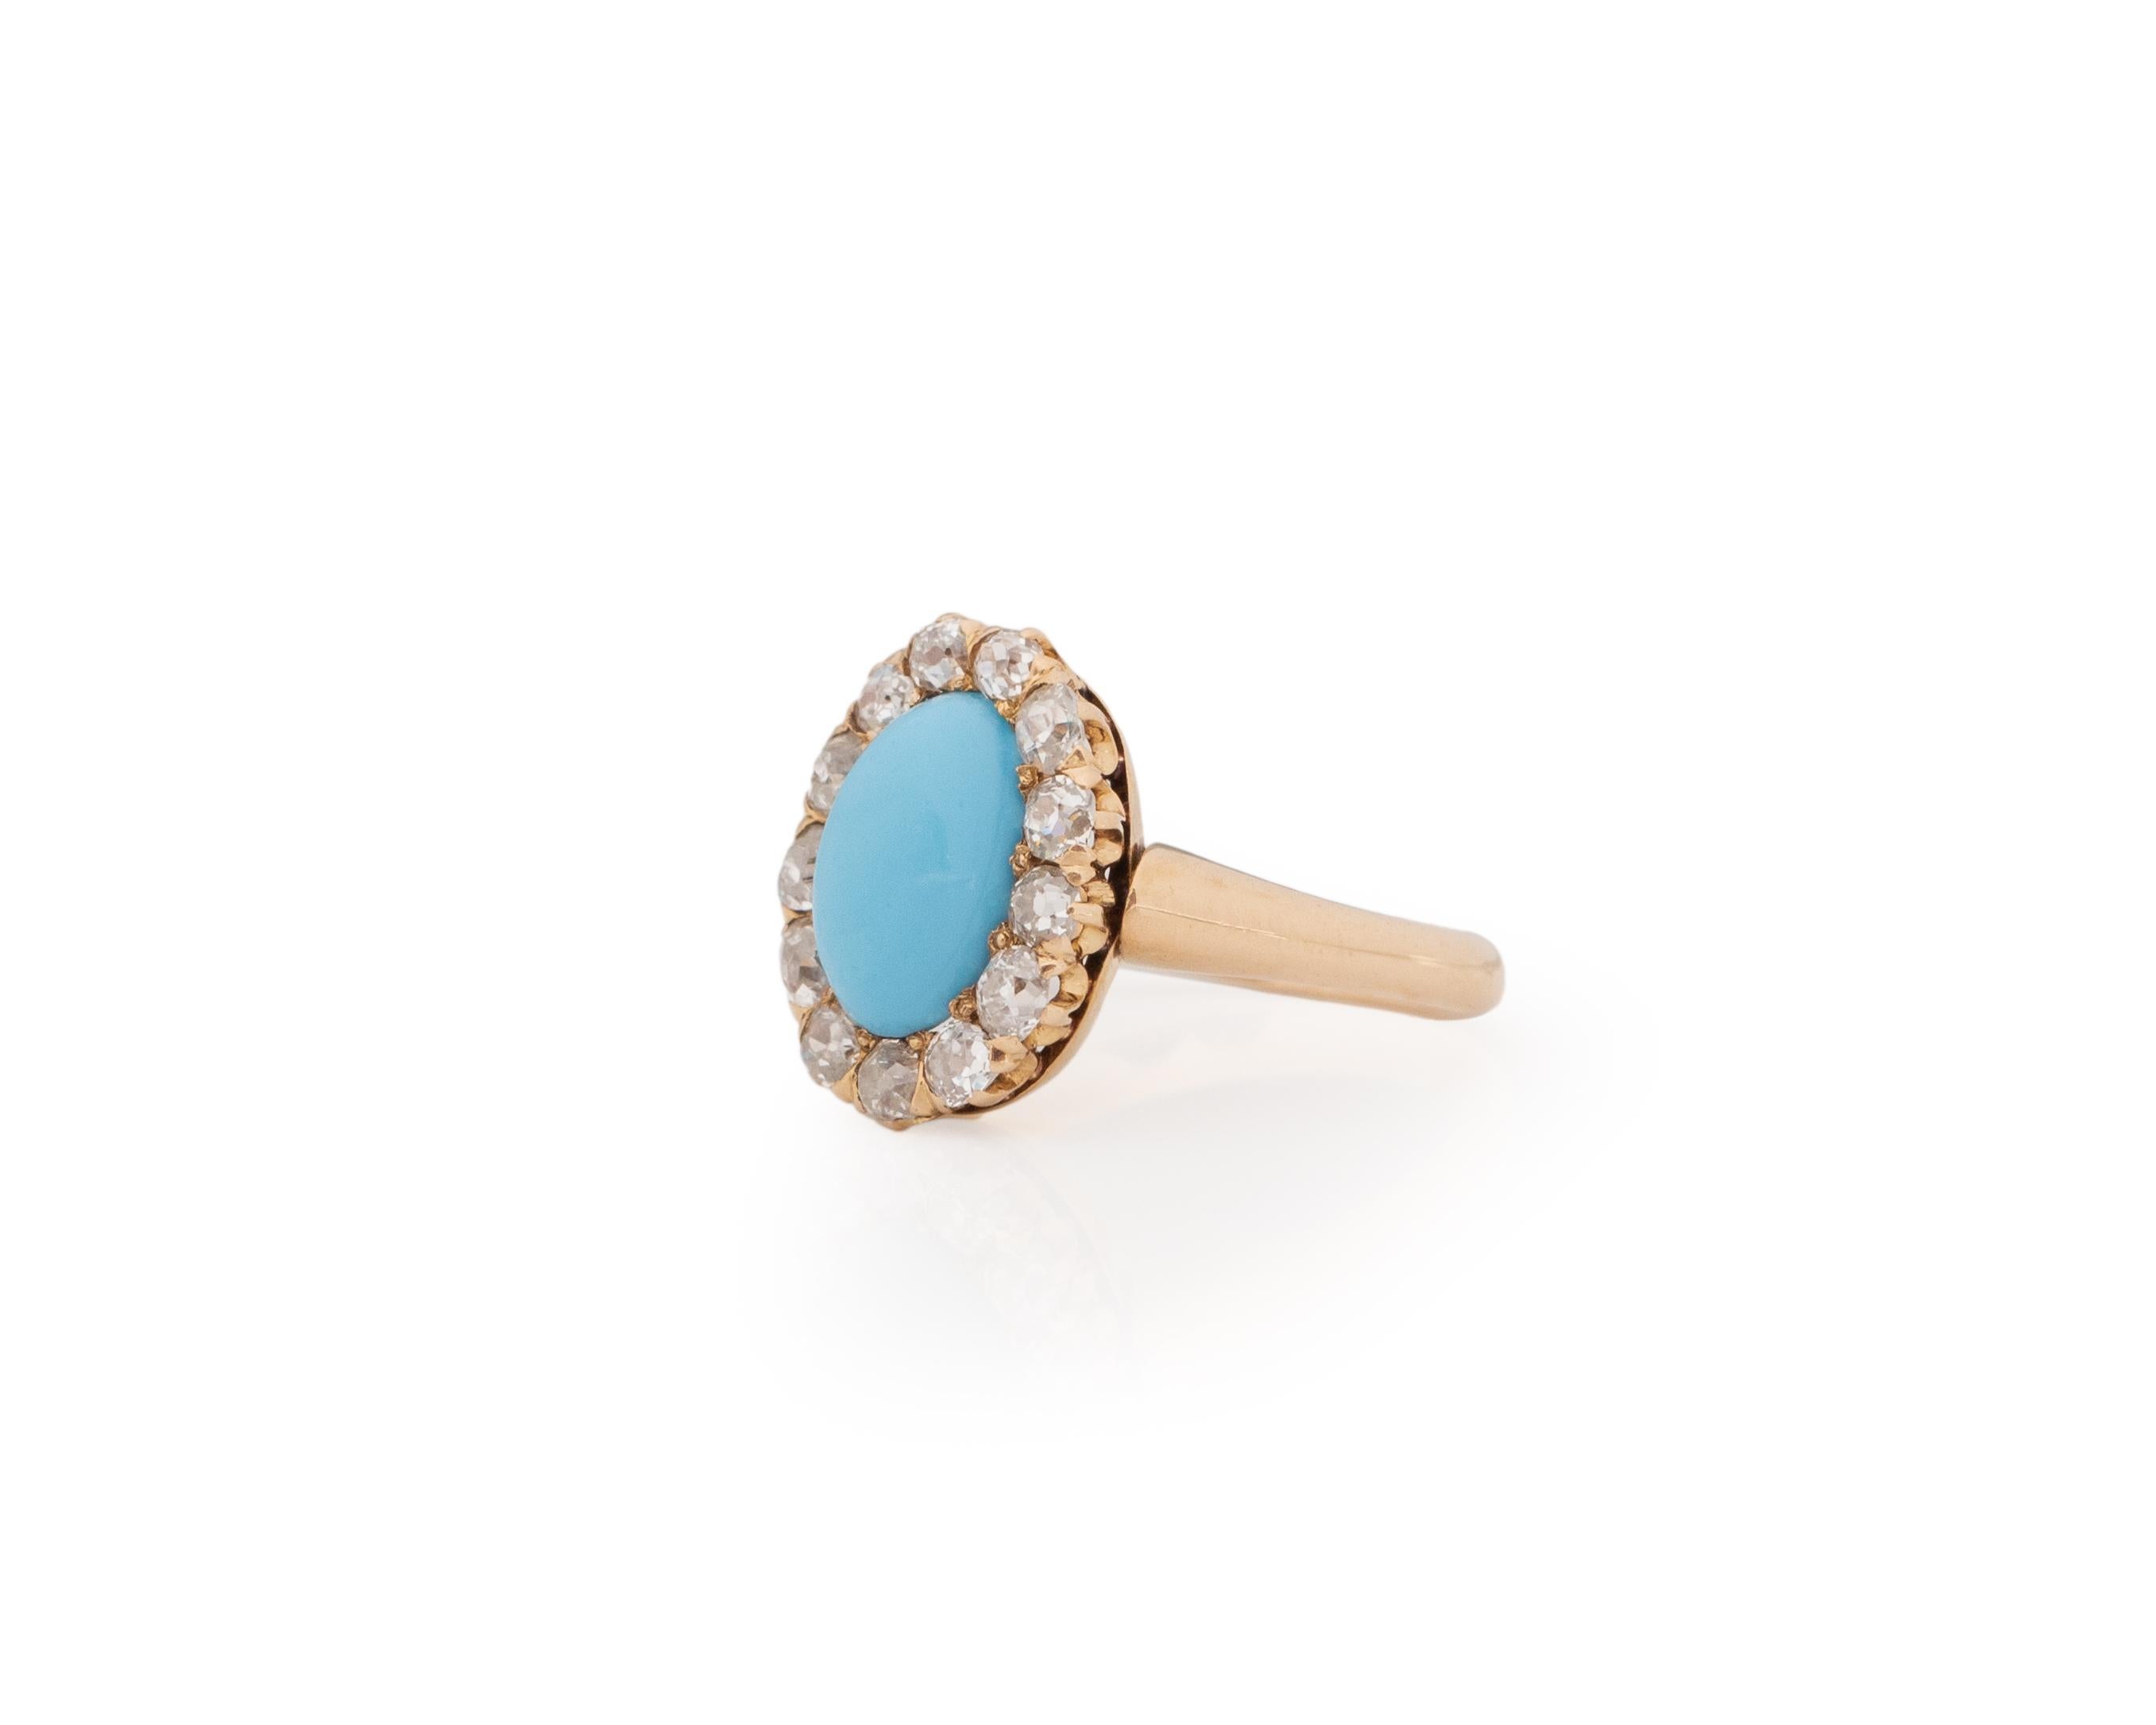 Ring Size: 4.5
Metal Type: 18c Yellow Gold [Hallmarked, and Tested]
Weight: 3.2 grams

Center Stone Details:
Type: Natural Turquoise
Weight: 1.00ct
Cut: Oval Cabochon
Color: Light Blue
Measurements: 9.0mm x 5.5mm

Finger to Top of Stone Measurement: